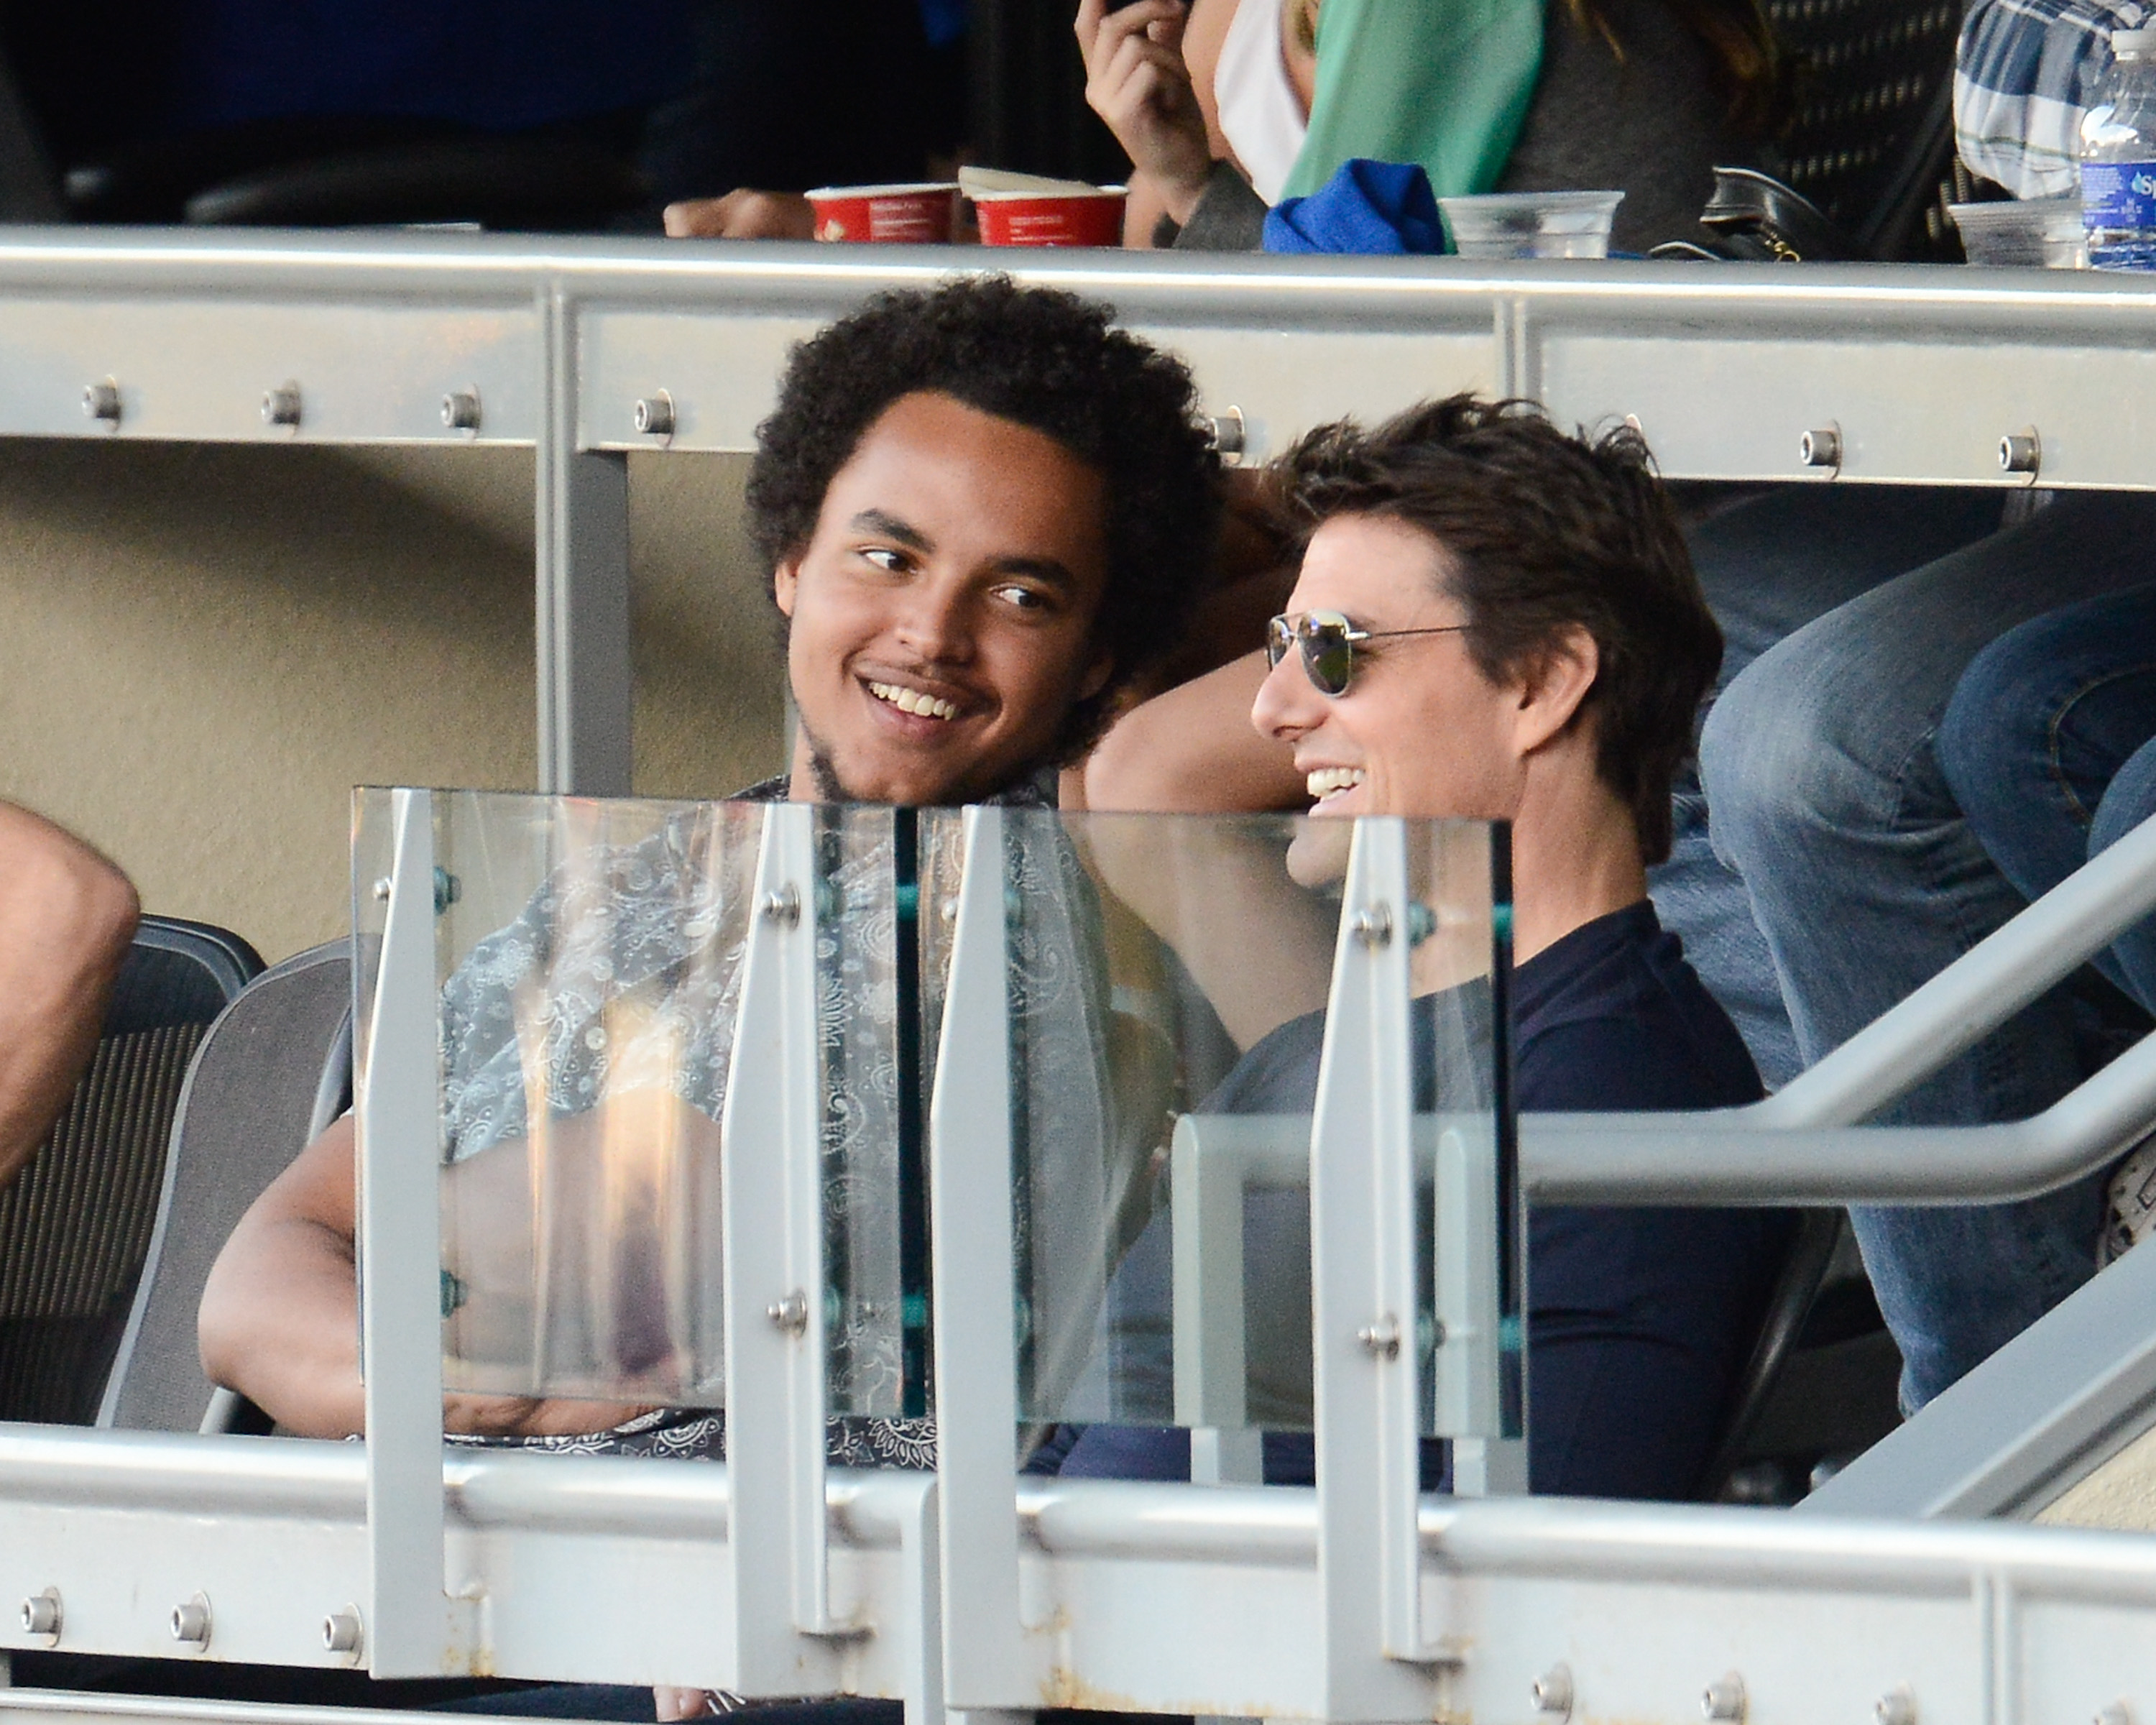 Connor and Tom Cruise at the National League Championship Series at Dodger Stadium in October 2013 | Source: Getty Images